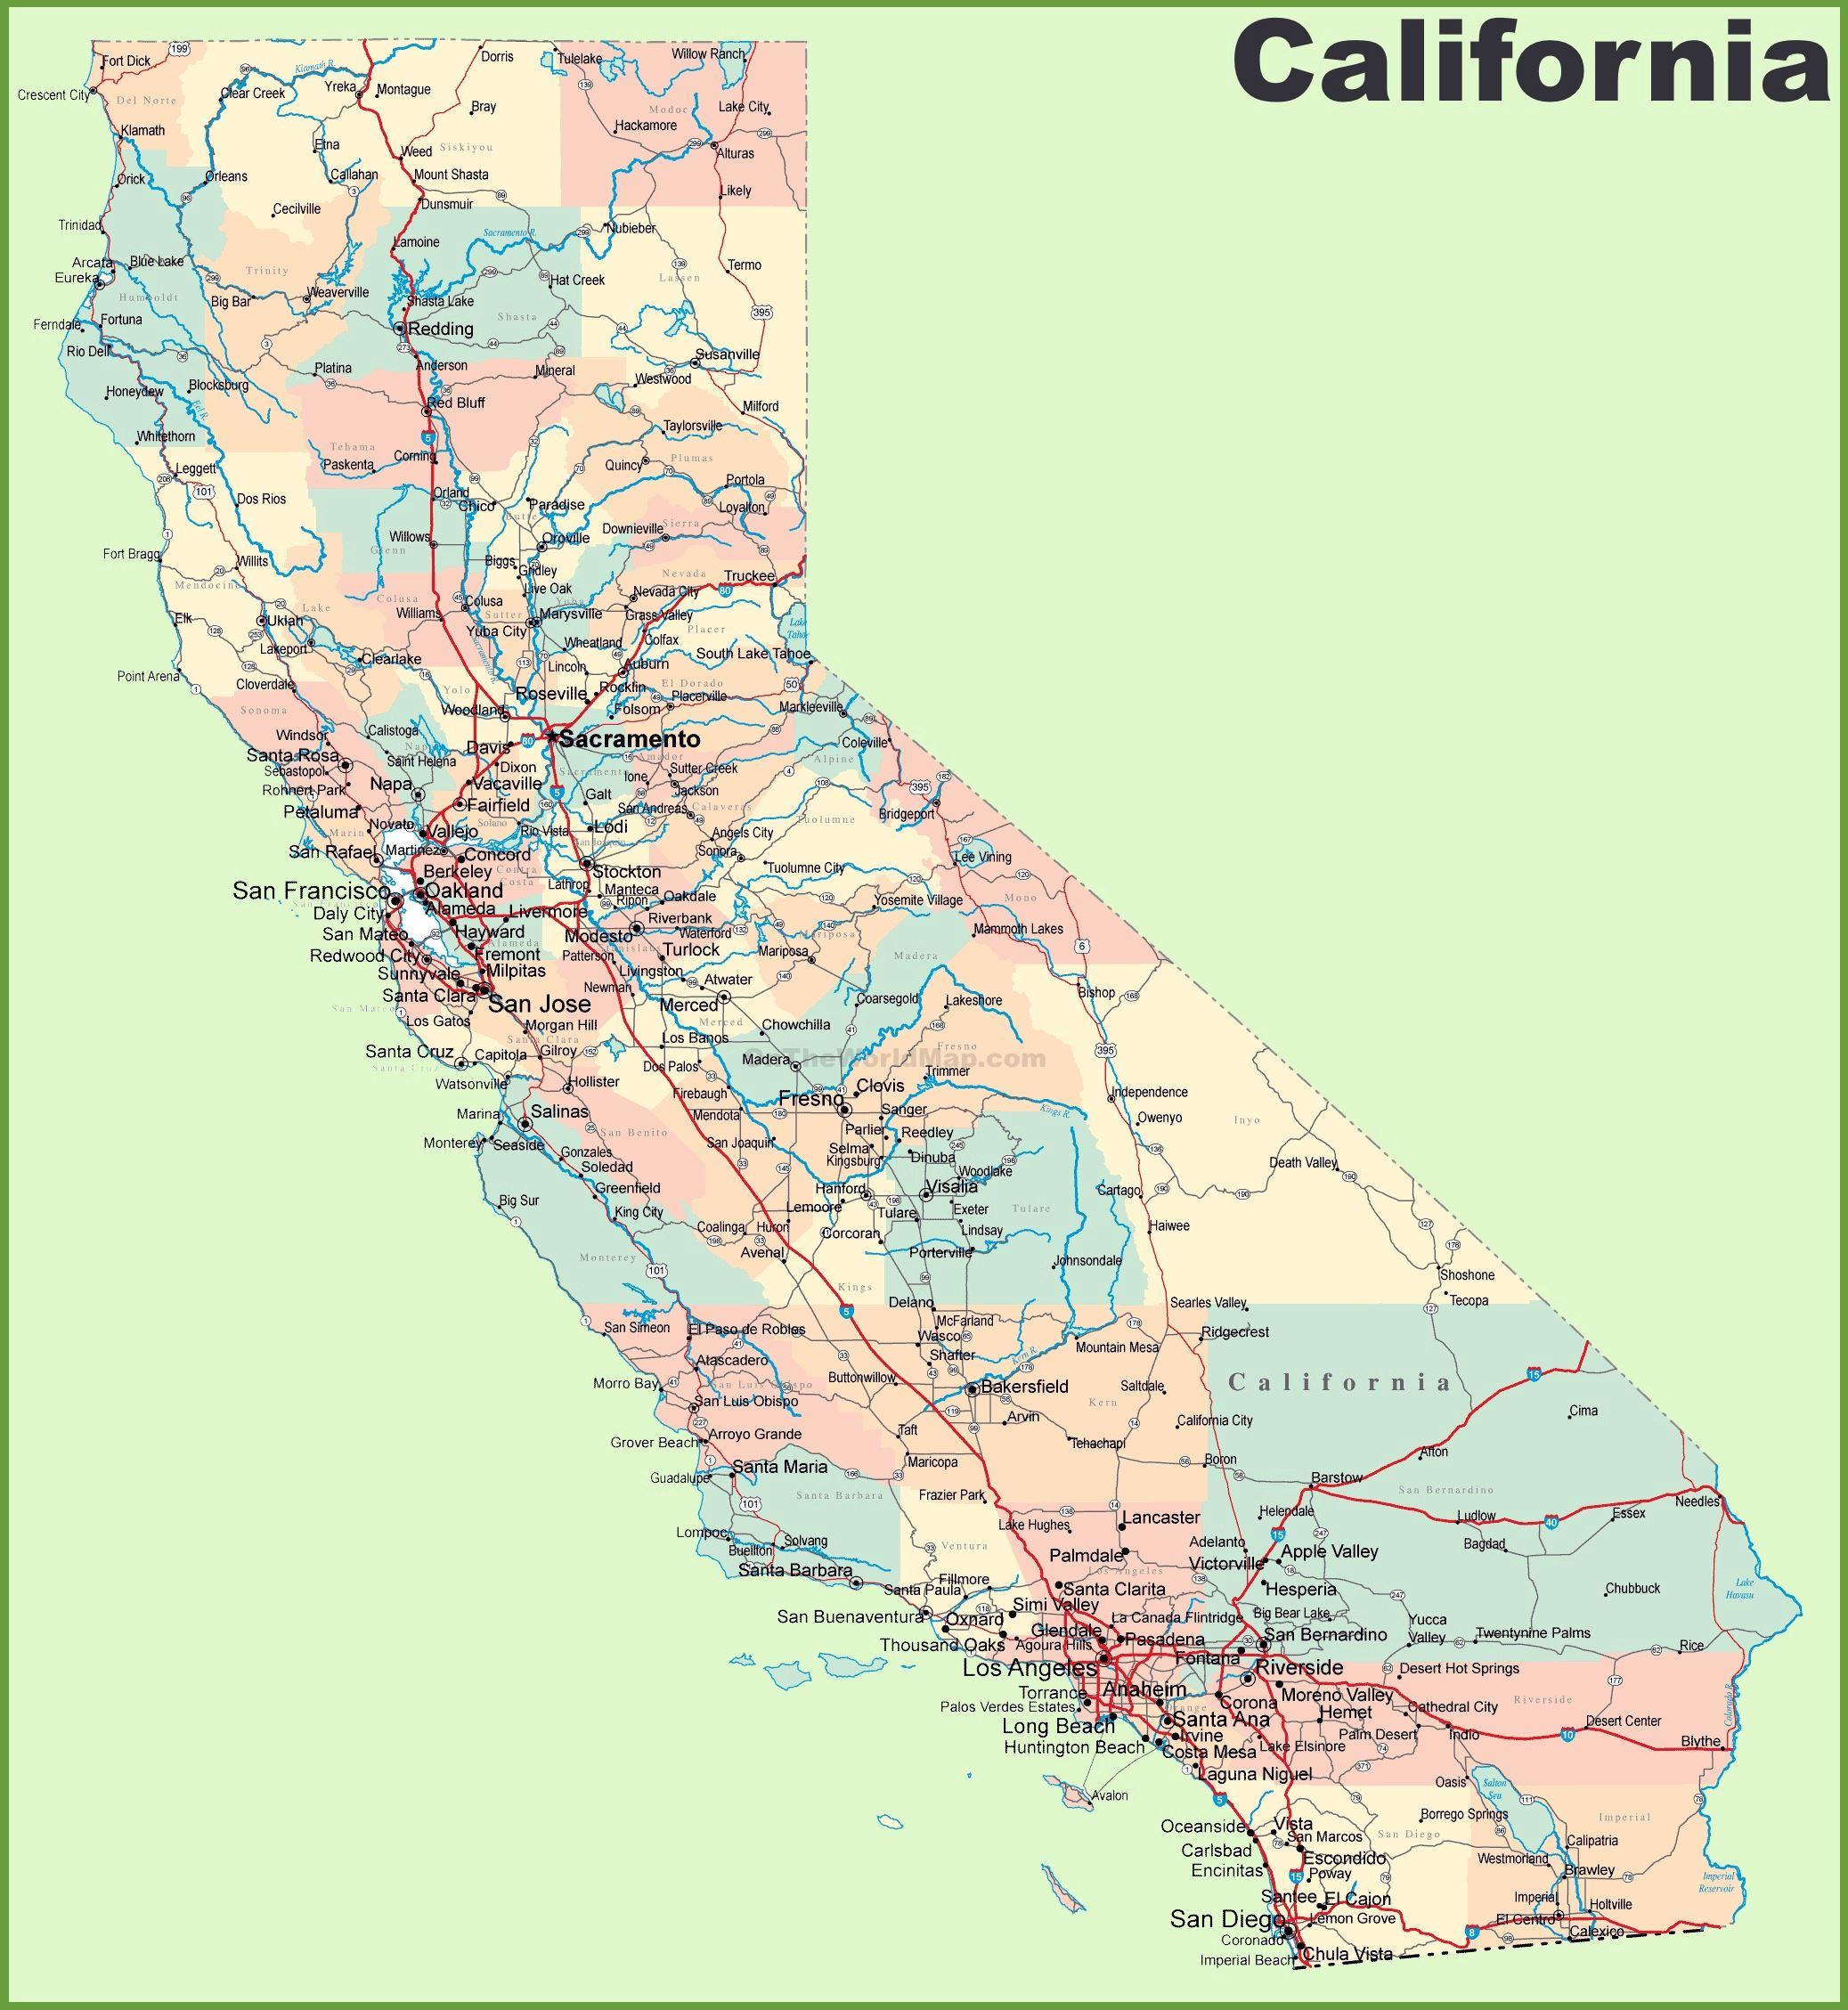 Large California Maps For Free Download And Print | High-Resolution - California State Highway Map